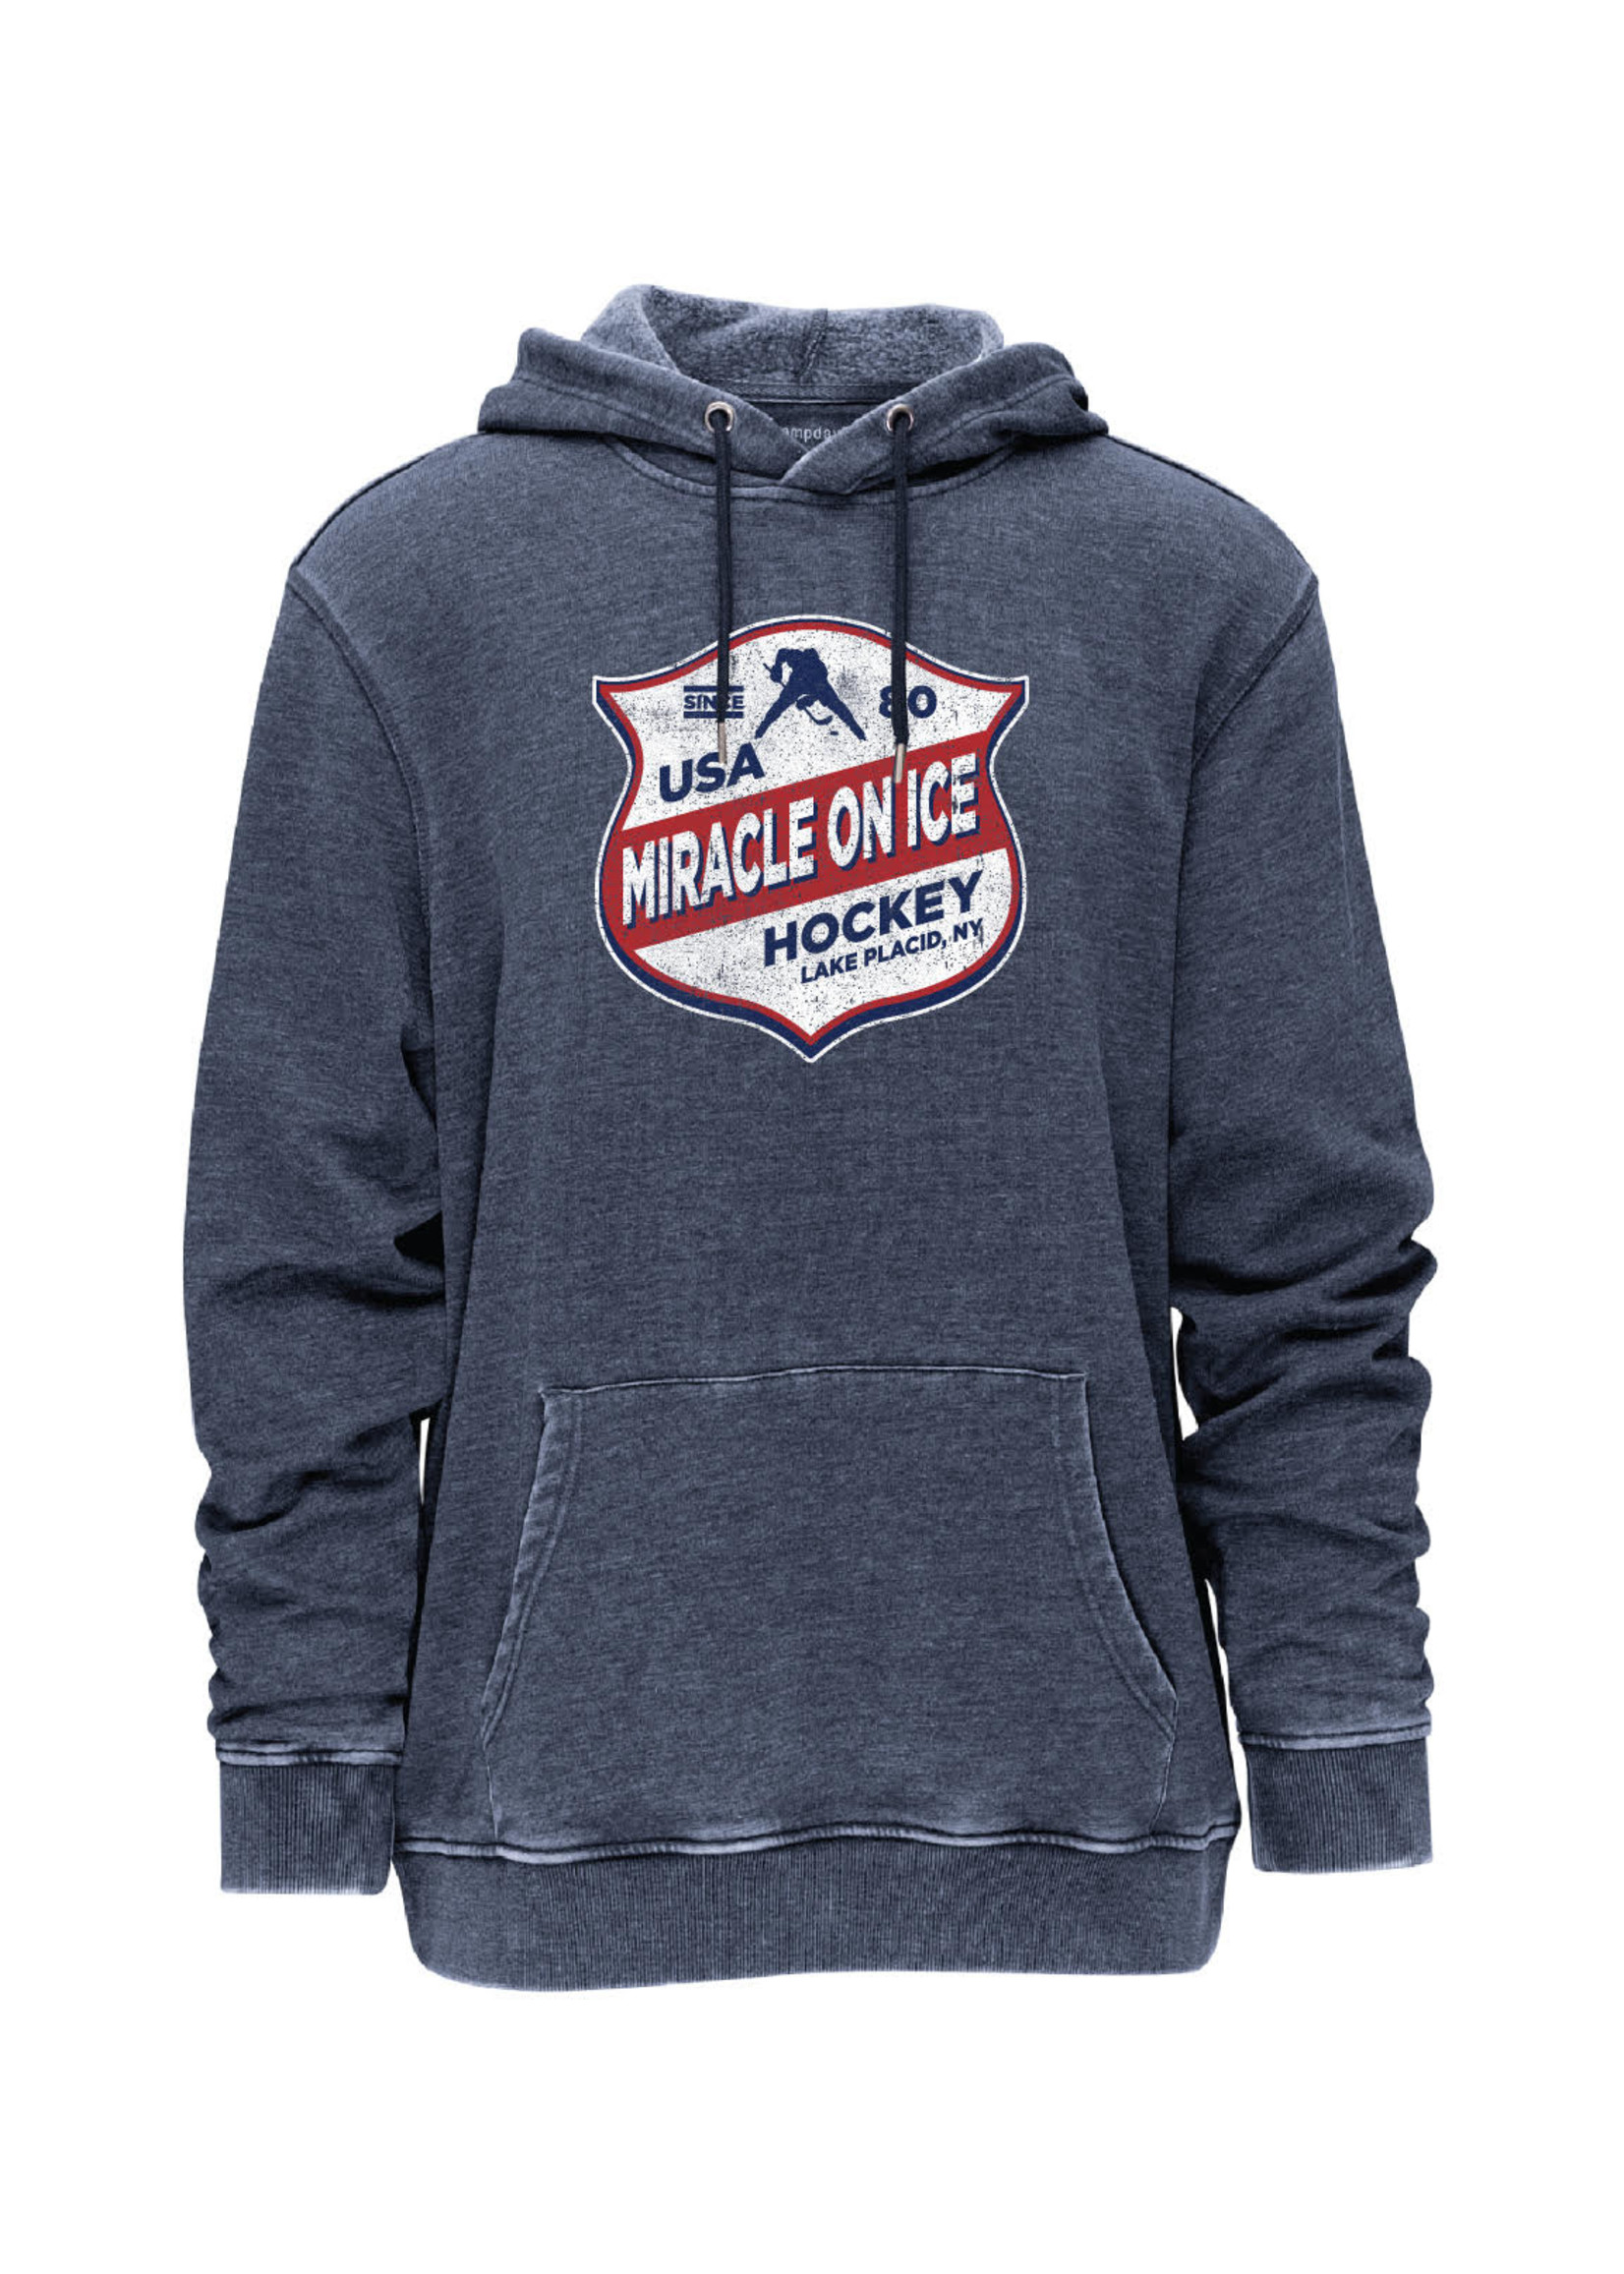 USAH Deluxe Miracle on Ice Vintage Hood